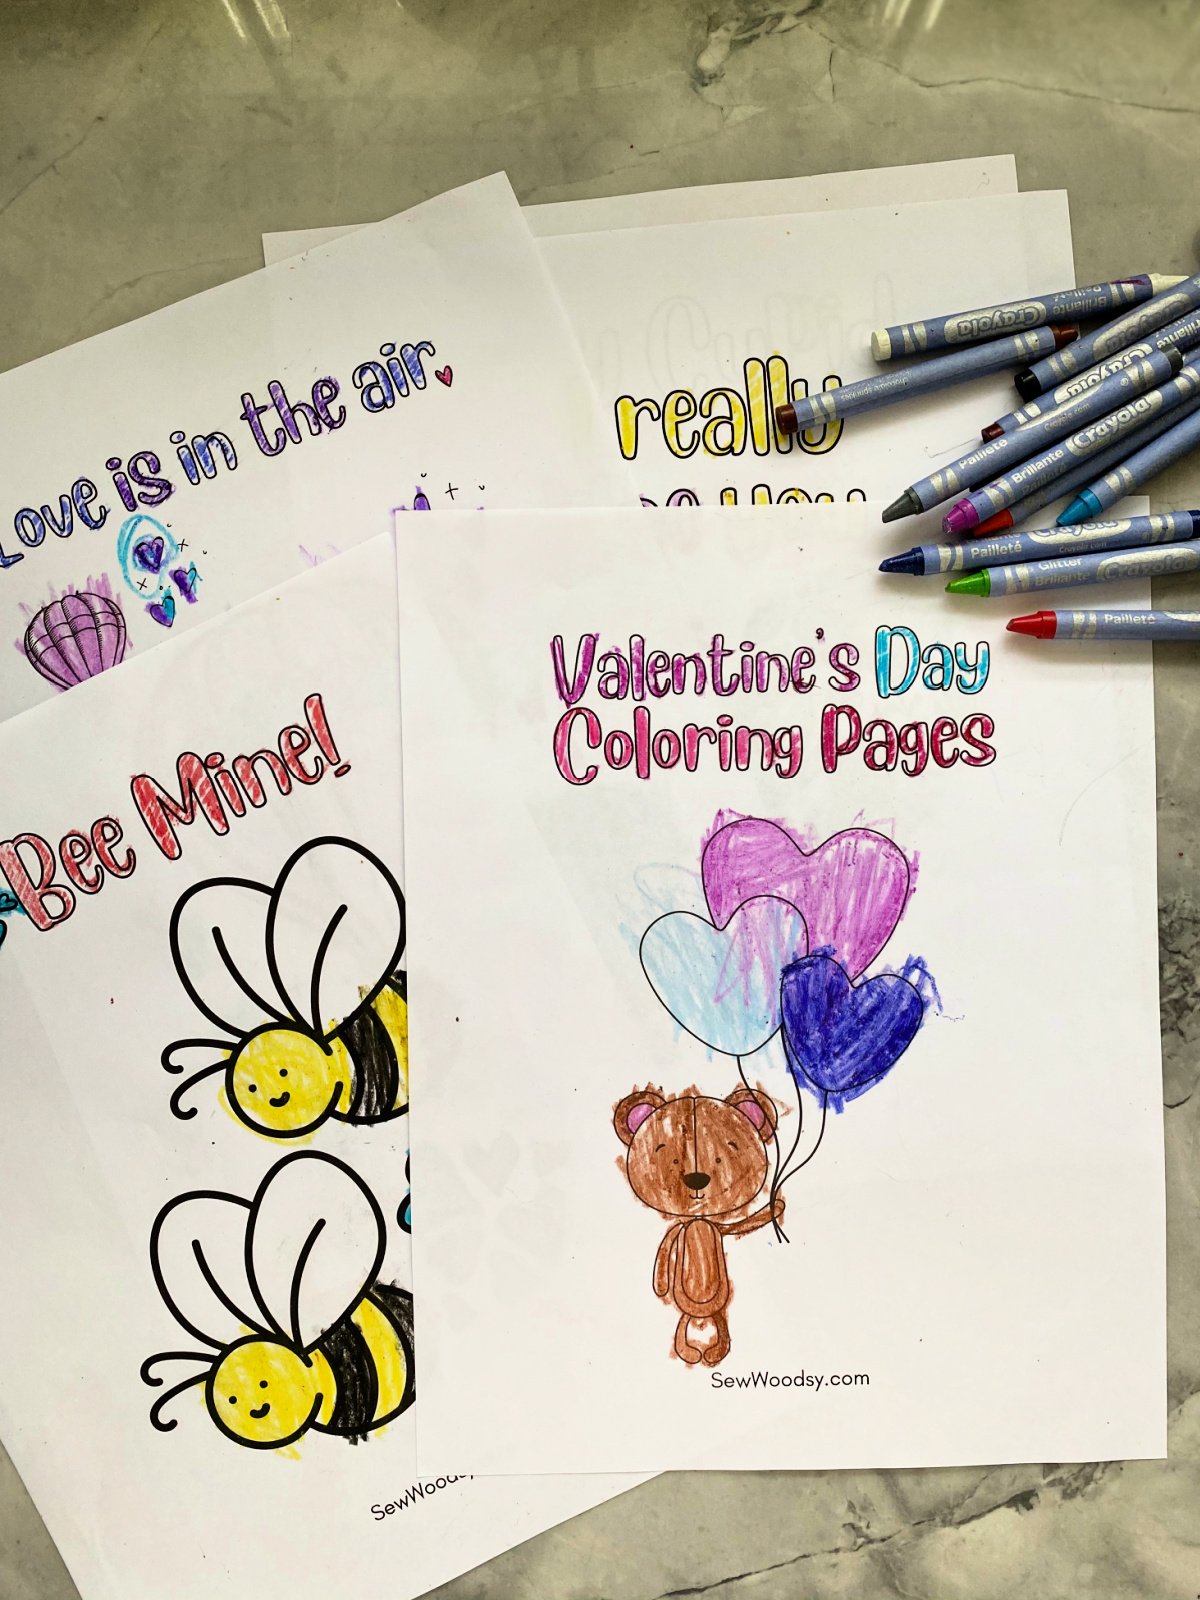 Five coloring sheets for Valentine's scattered with crayons on top.